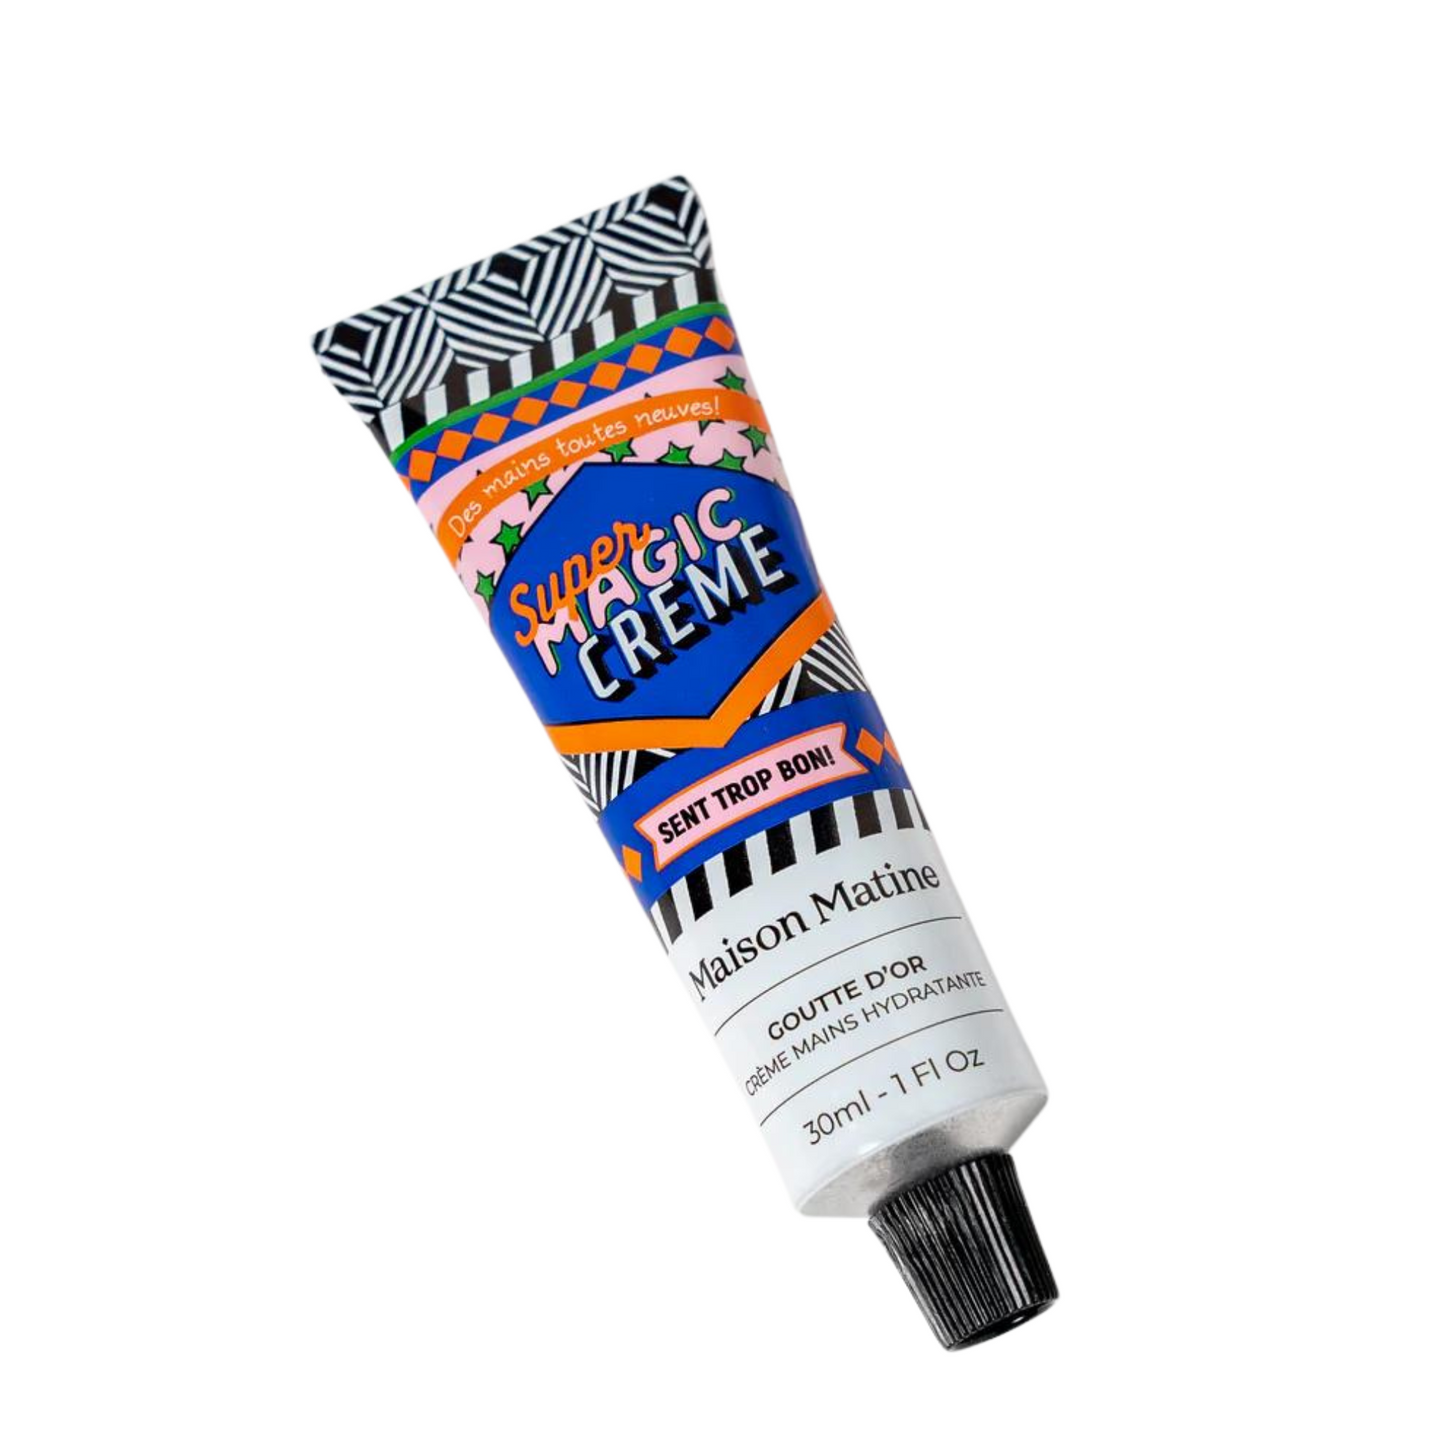 Primary Image of Goutte D'or Hand Cream